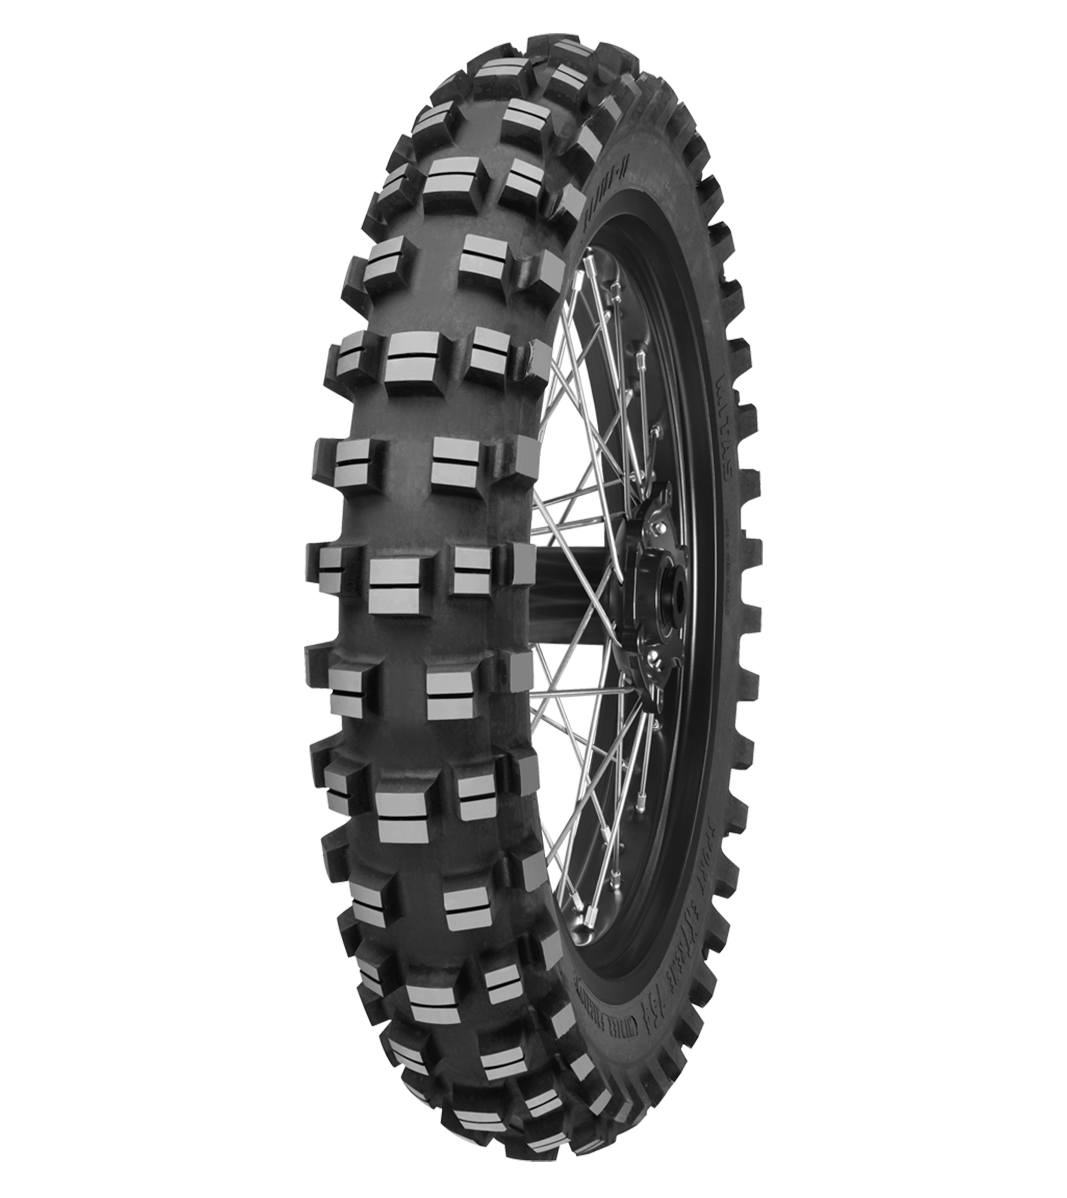 Mitas XT-754 120/90-18 All-Terrain Off-Road 65P No Stripe Tube Rear Tire, 228023, 120/90-18, All-Terrain, Off-Road, Rear, XT-754, Tires - Imported and distributed in North & South America by Lindeco Genuine Powersports - Premier Powersports Equipment and Accessories for Motorcycle Enthusiasts, Professional Riders and Dealers.